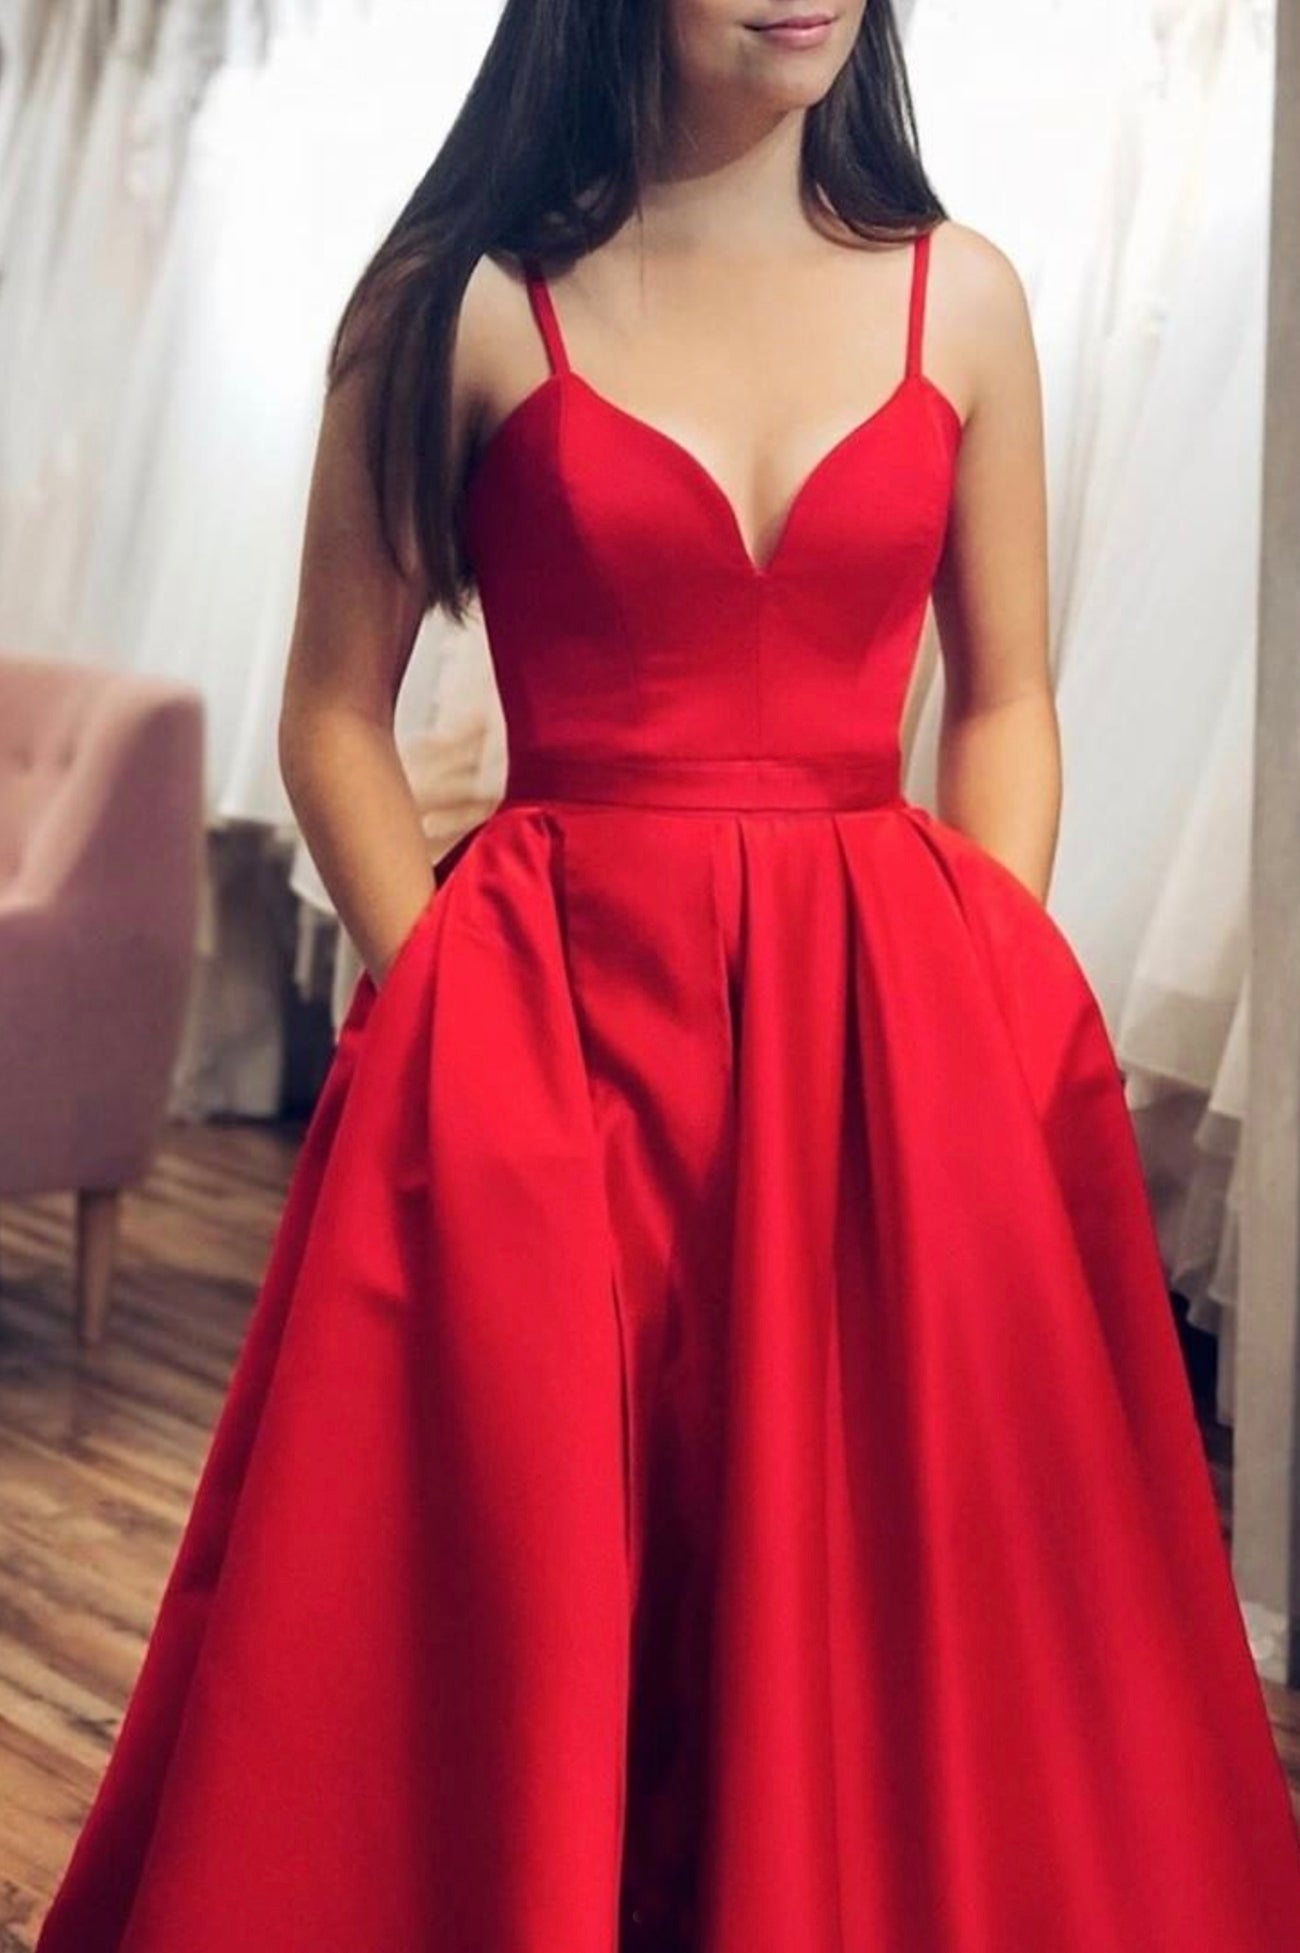 Red Satin Long Prom Dress, Simple Spaghetti Strap Evening Dress with Slit